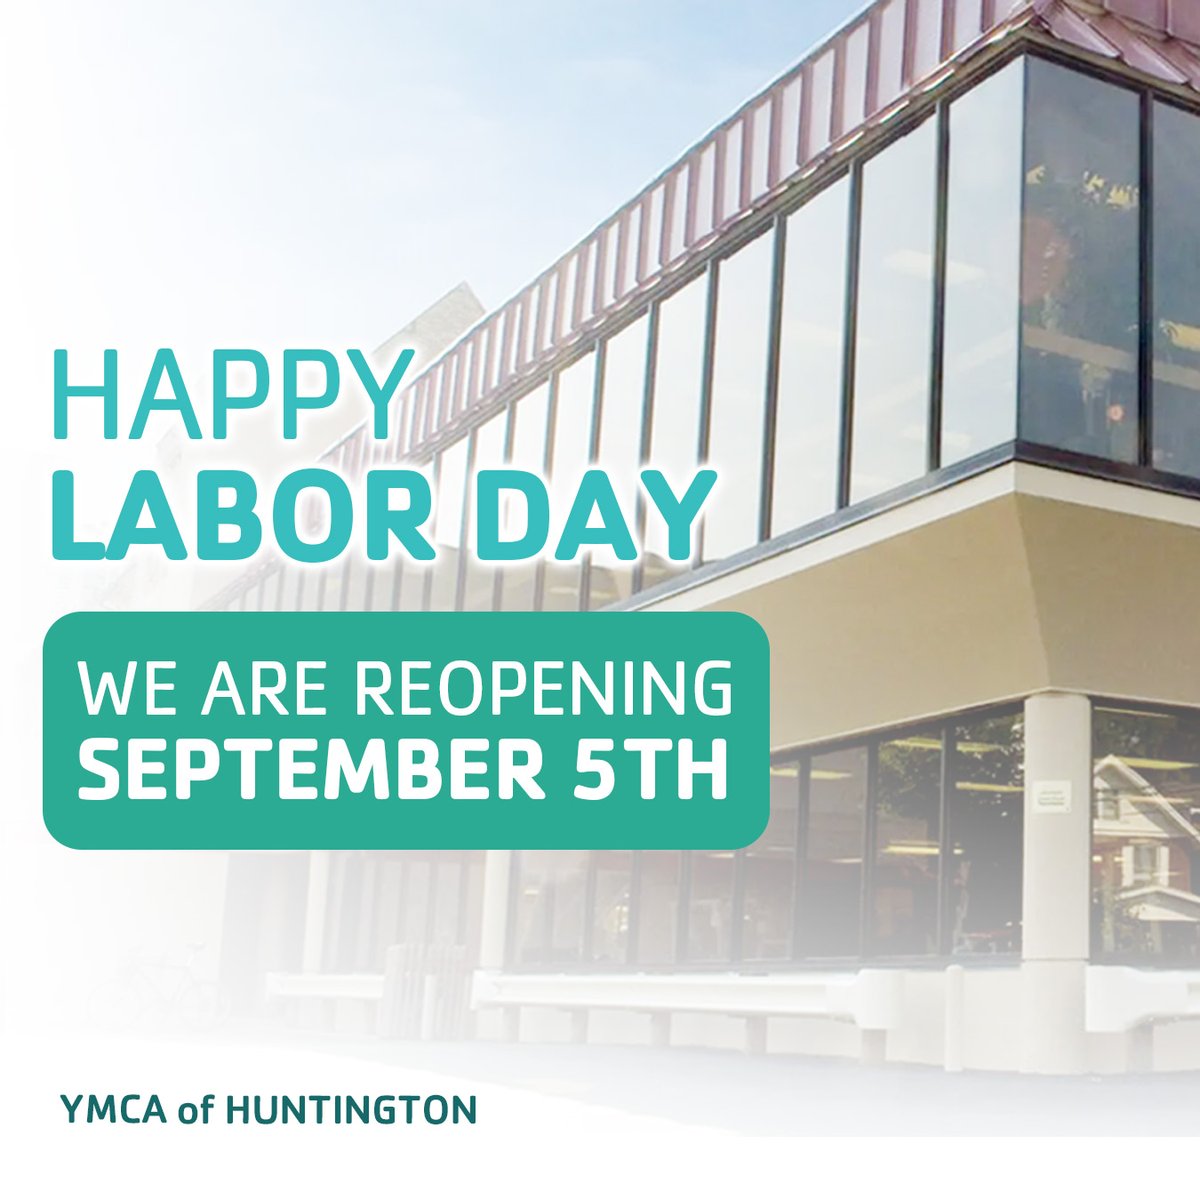 Happy Labor Day! We know routines are important. After our week of cleaning and improvements, we're ready to jump back into action with you! Join us on Tuesday as we open for normal business hours! 📅🏋️‍♀️ #BackToRoutine #YMCAFamily